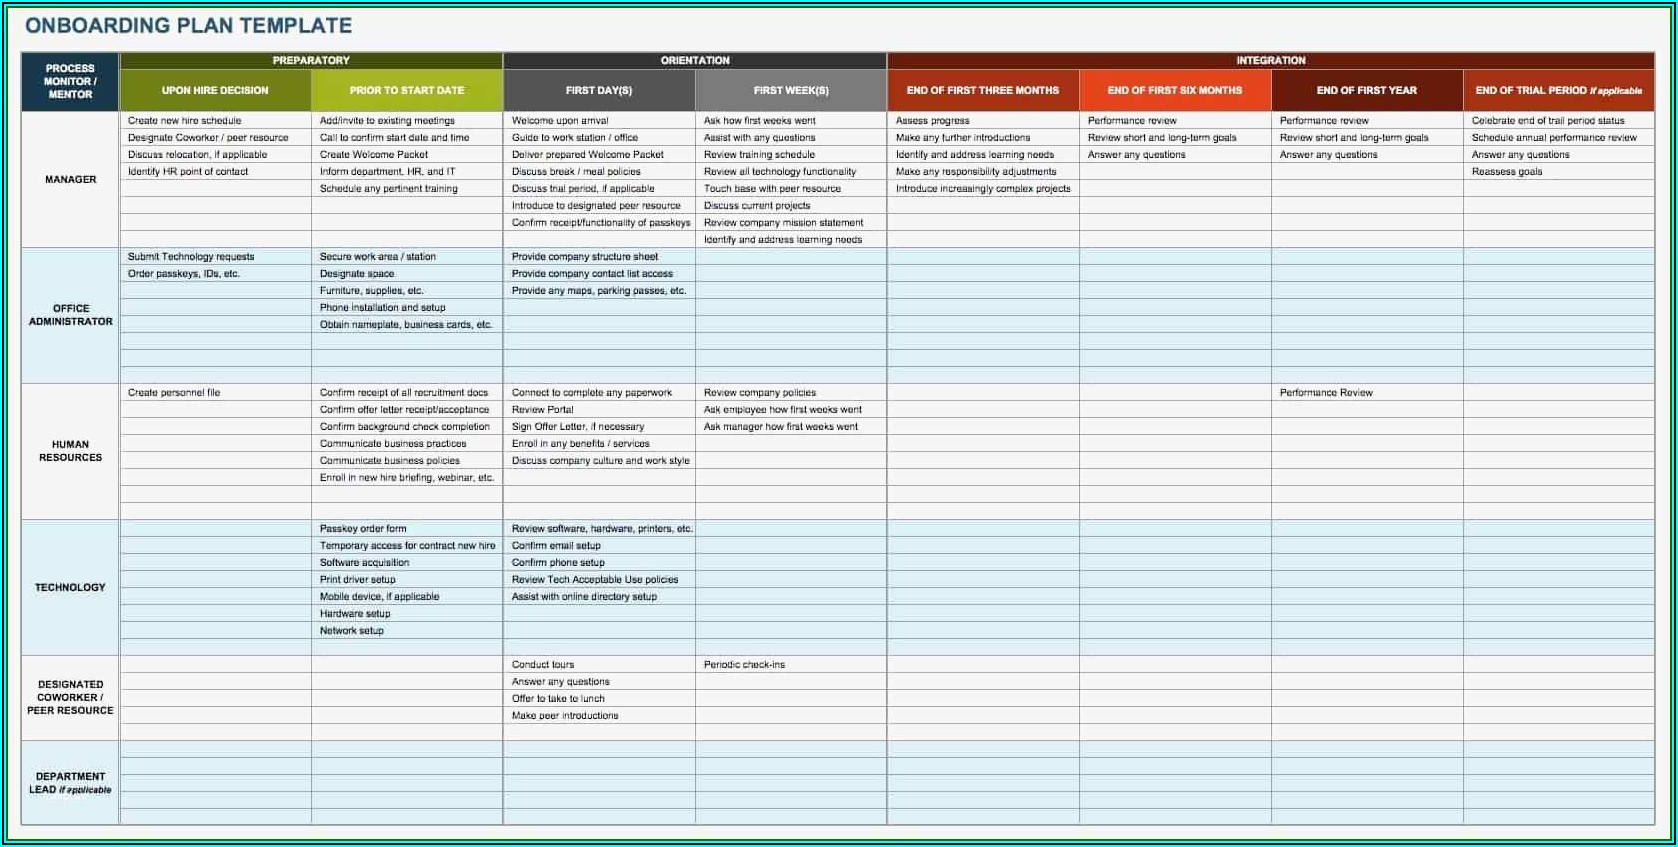 New Employee Onboarding Template Excel Template 2 : Resume Examples #